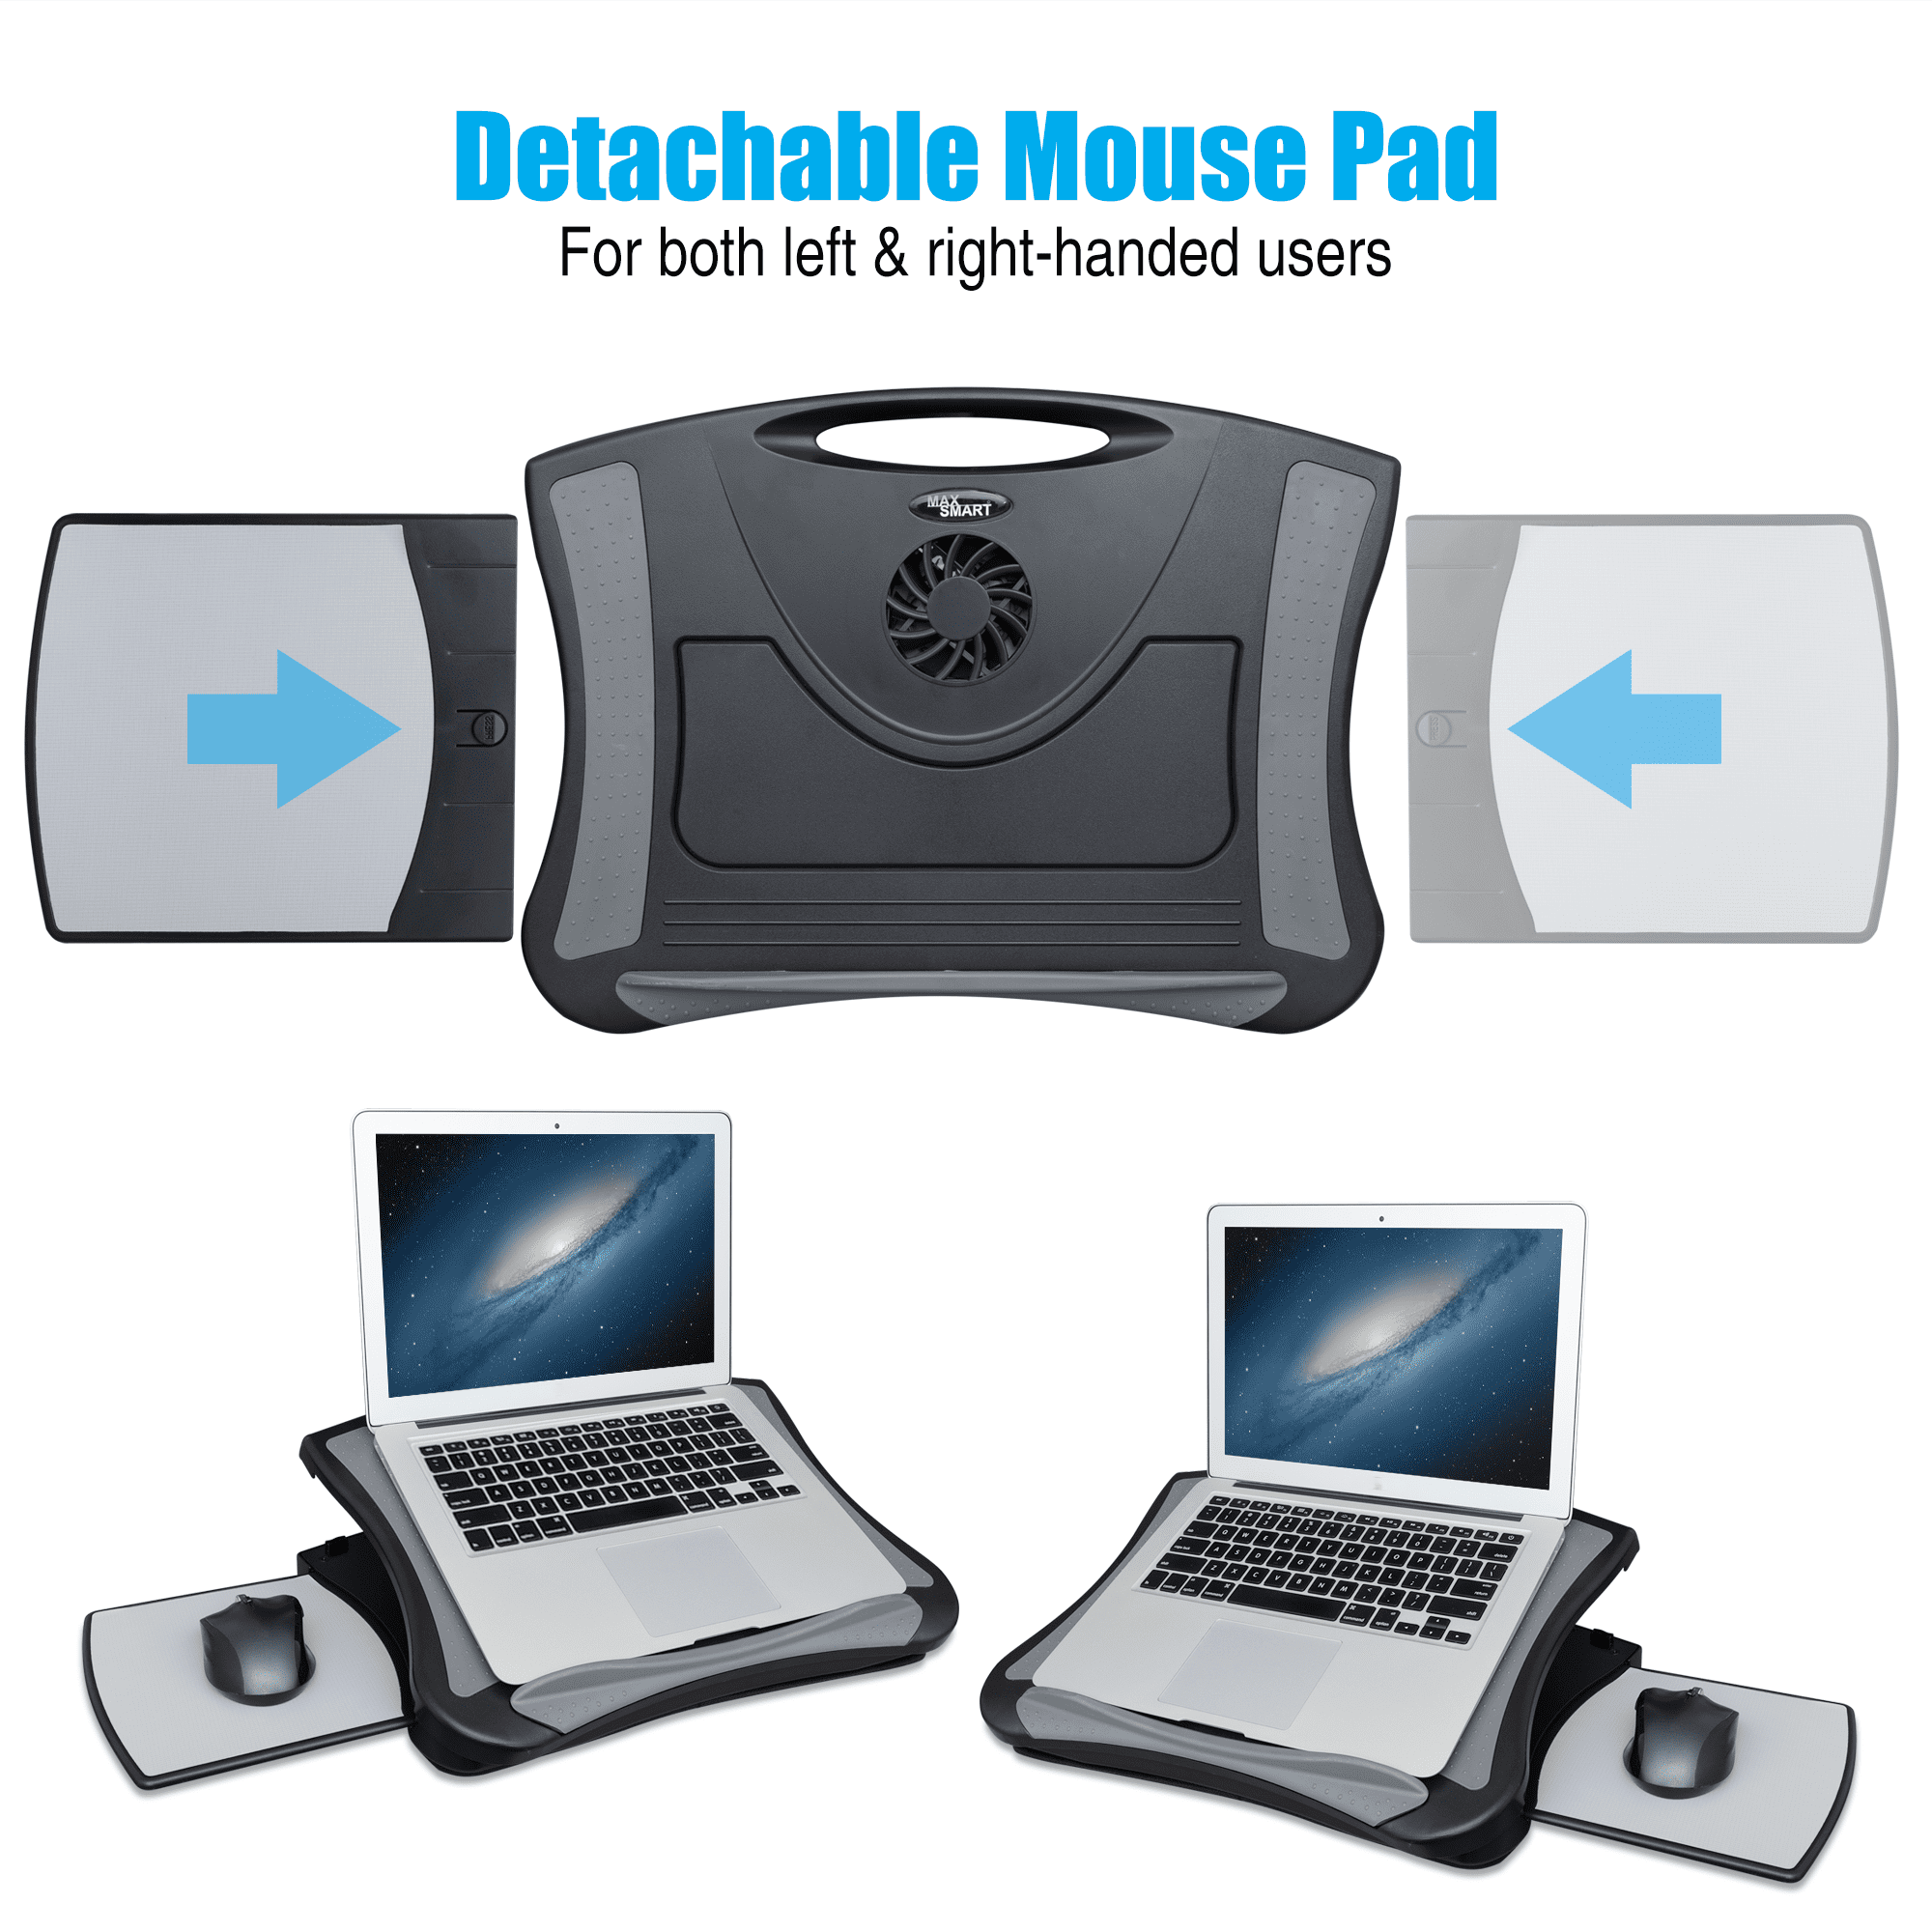  Extra Large Lap Laptop Desk - Full PU Material Mouse Pad Gaming  Tray - Portable LapDesk with Phone Holder & Wrist Rest for Notebook,  MacBook, Tablet, Bed, Sofa(Black, Fit Up 17.3-in